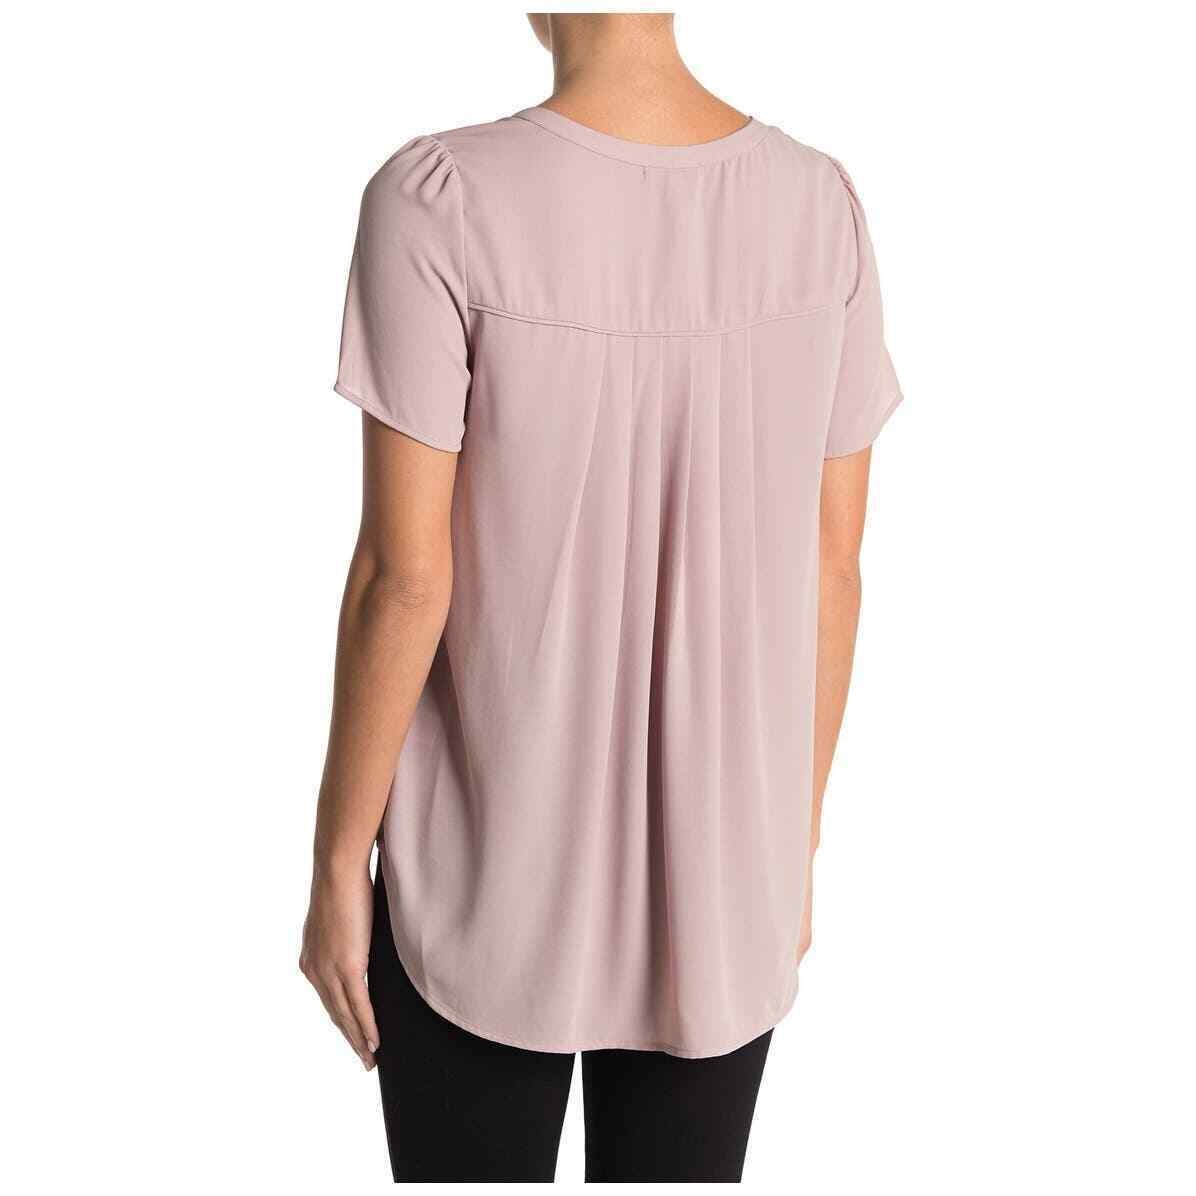 Pleione Women's Dusty Mauve Solid Pleated Back High/low Tunic Top, Small